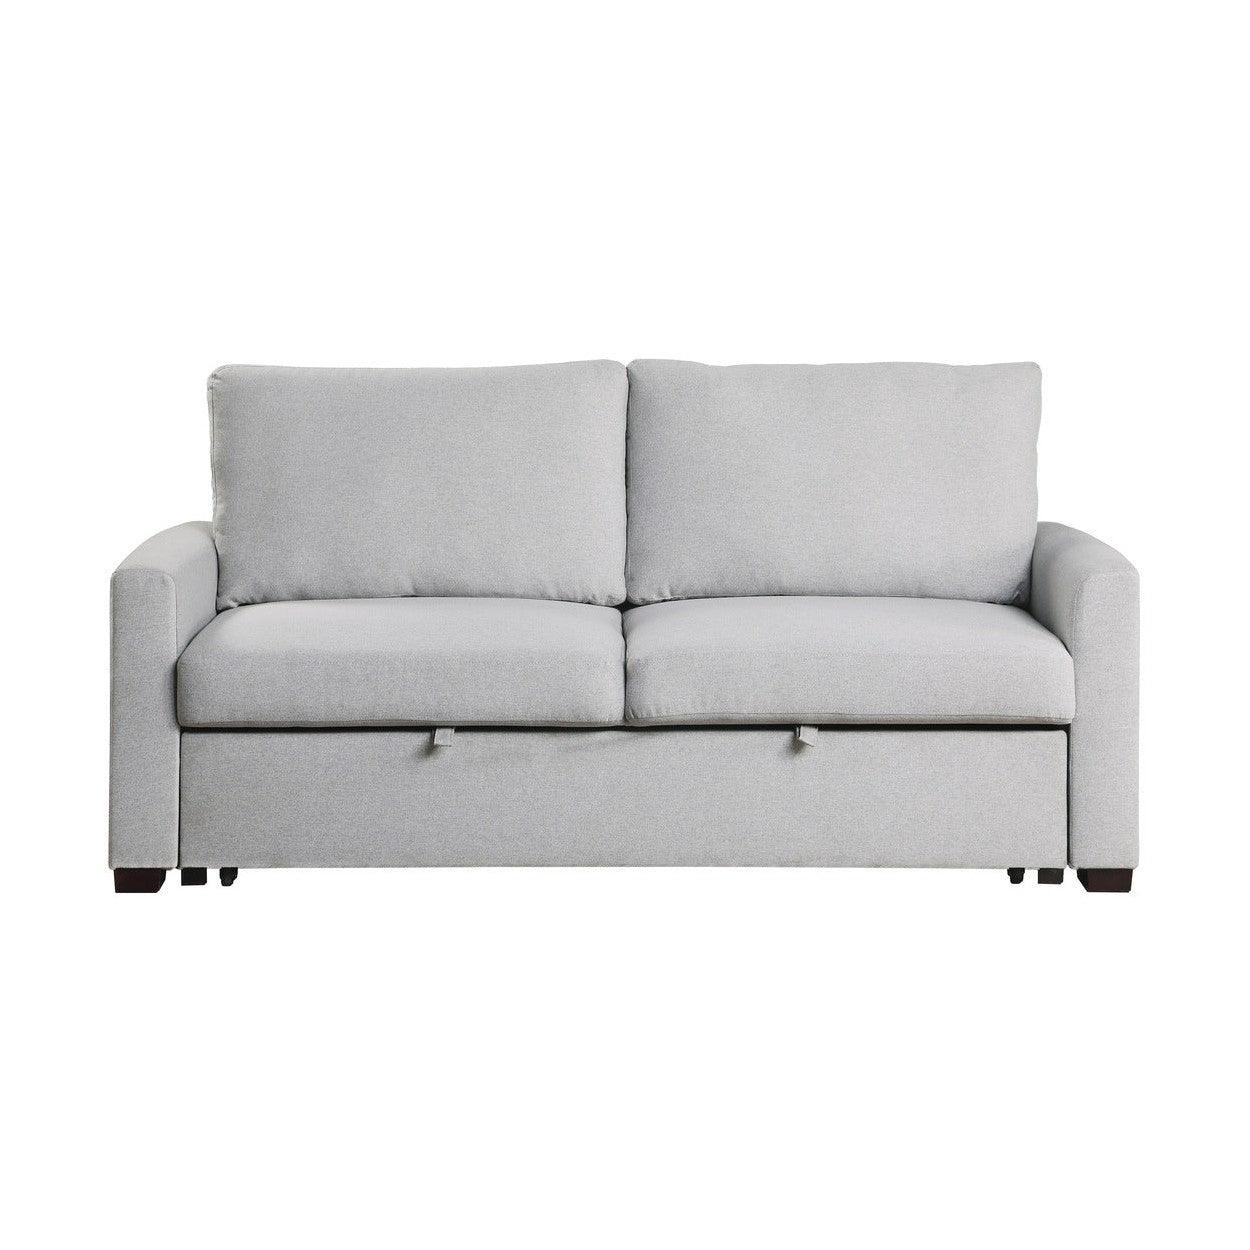 Homelegance Sofa With Pull Out Bed Abd Click Clack Back